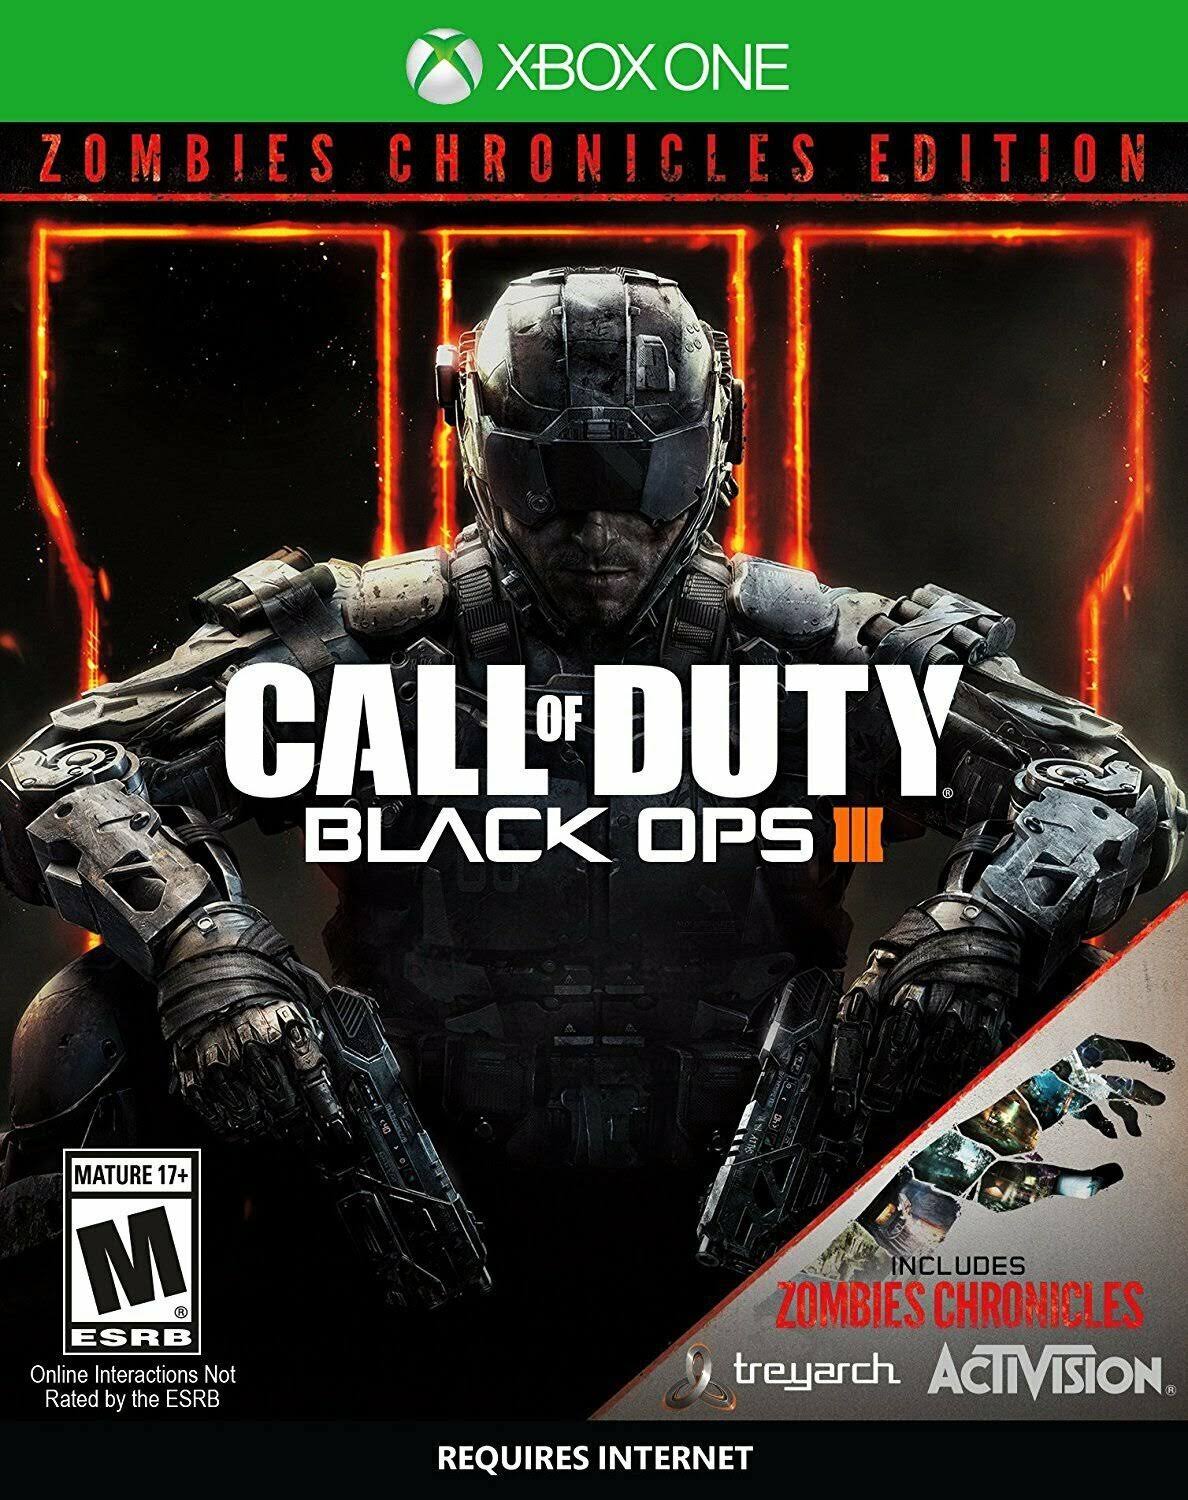 Call of Duty Black Ops III Zombie Chronicles - Xbox One